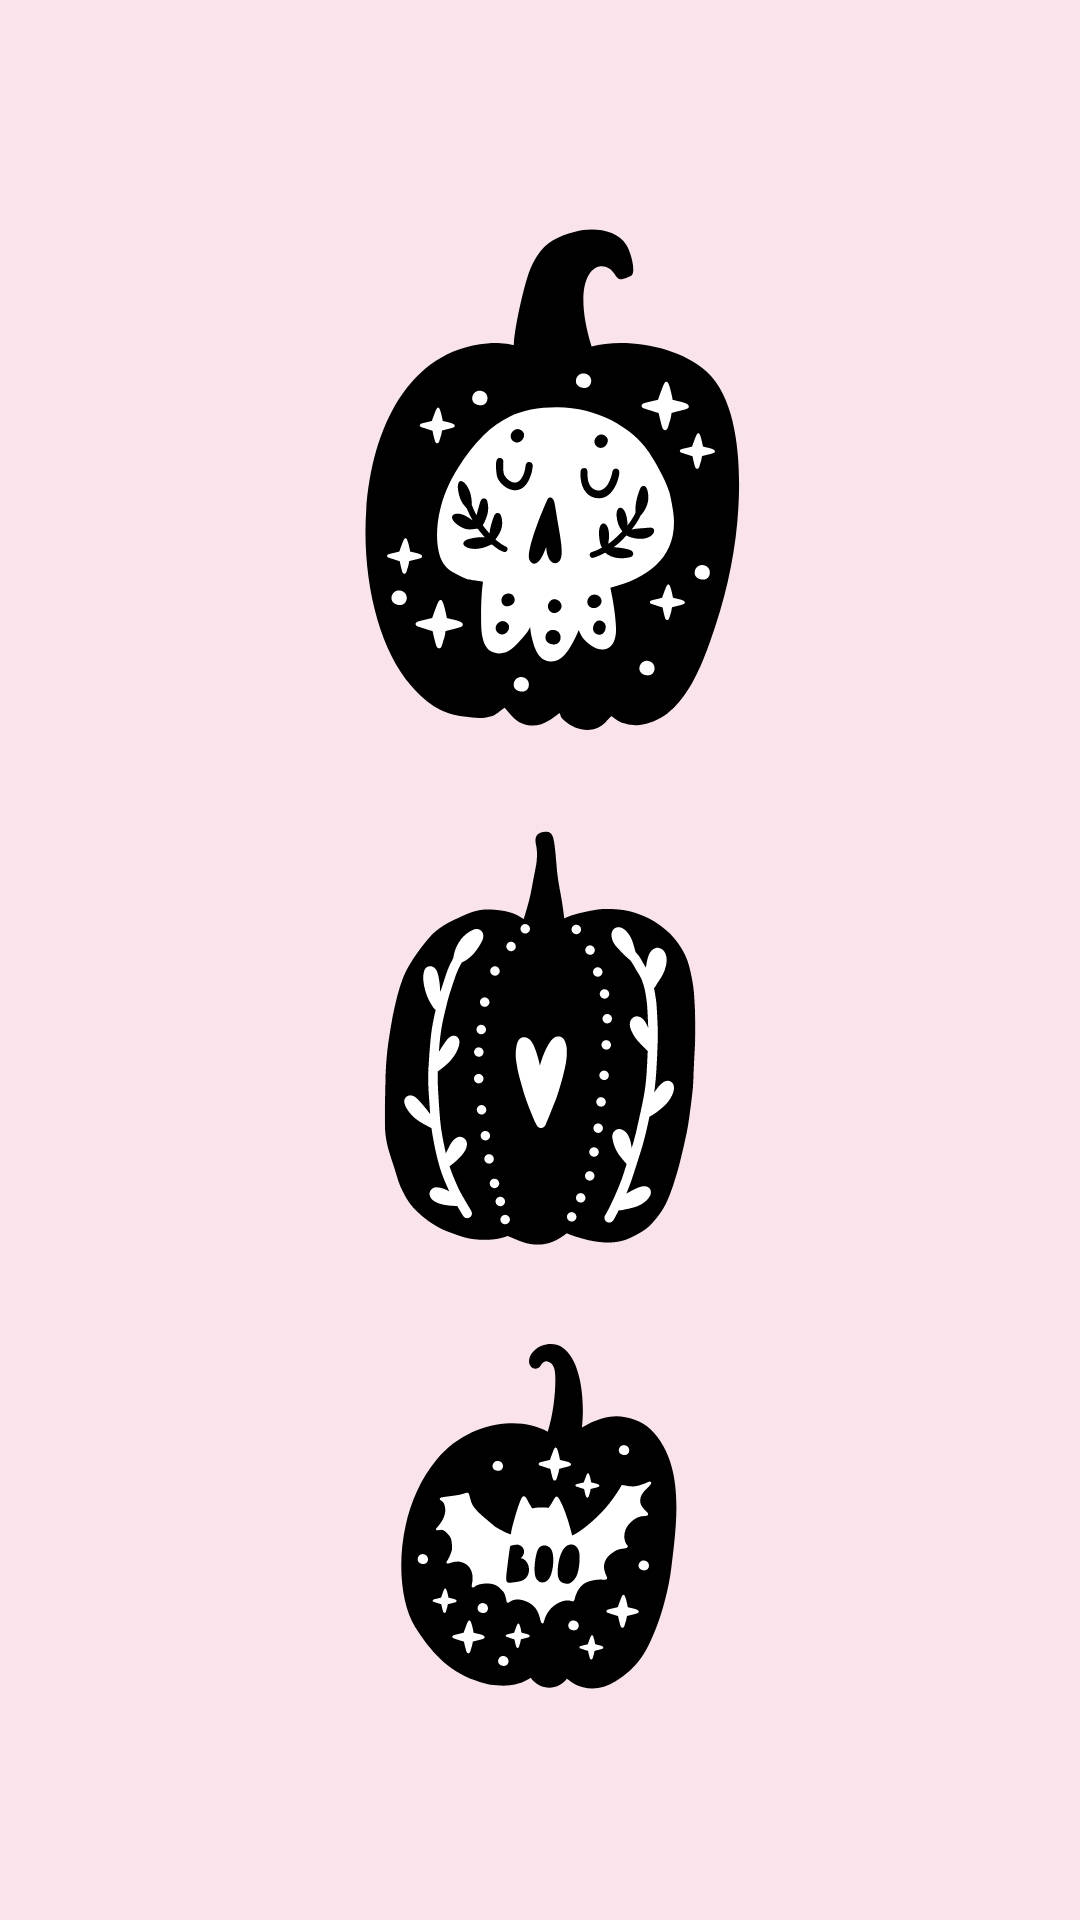 An adorable Halloween-themed mobile phone, perfect for the spooky season! Wallpaper